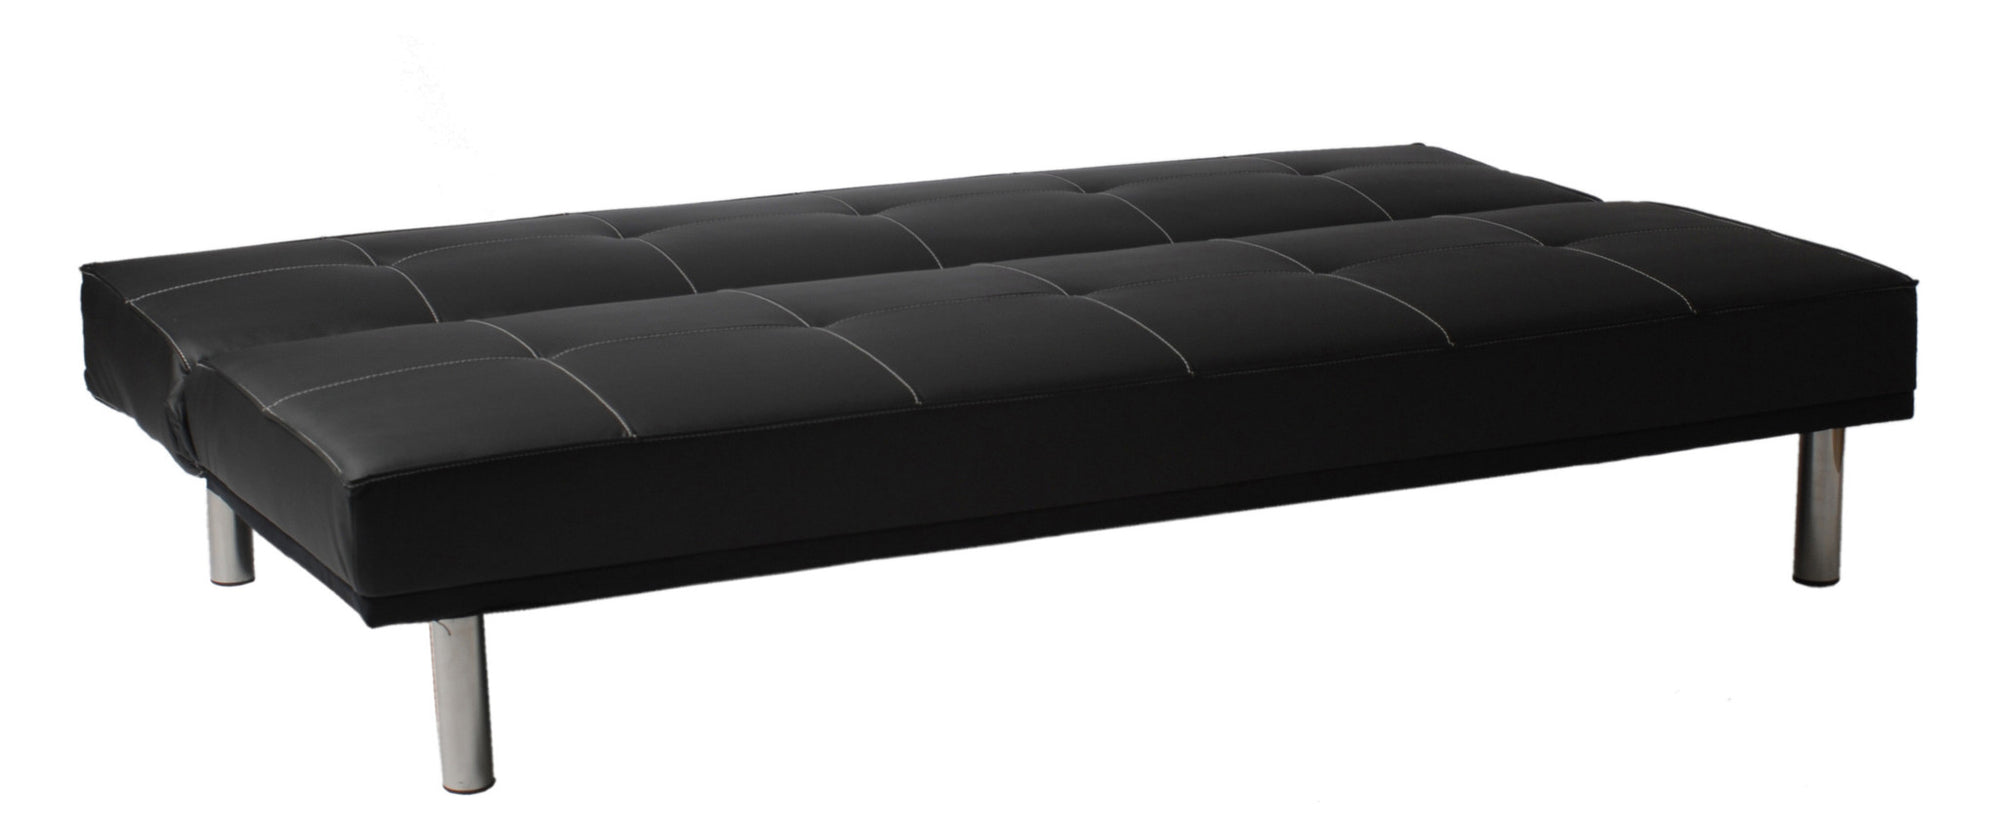 Sev Sofa Bed Black Leatherette/Stainless Steel